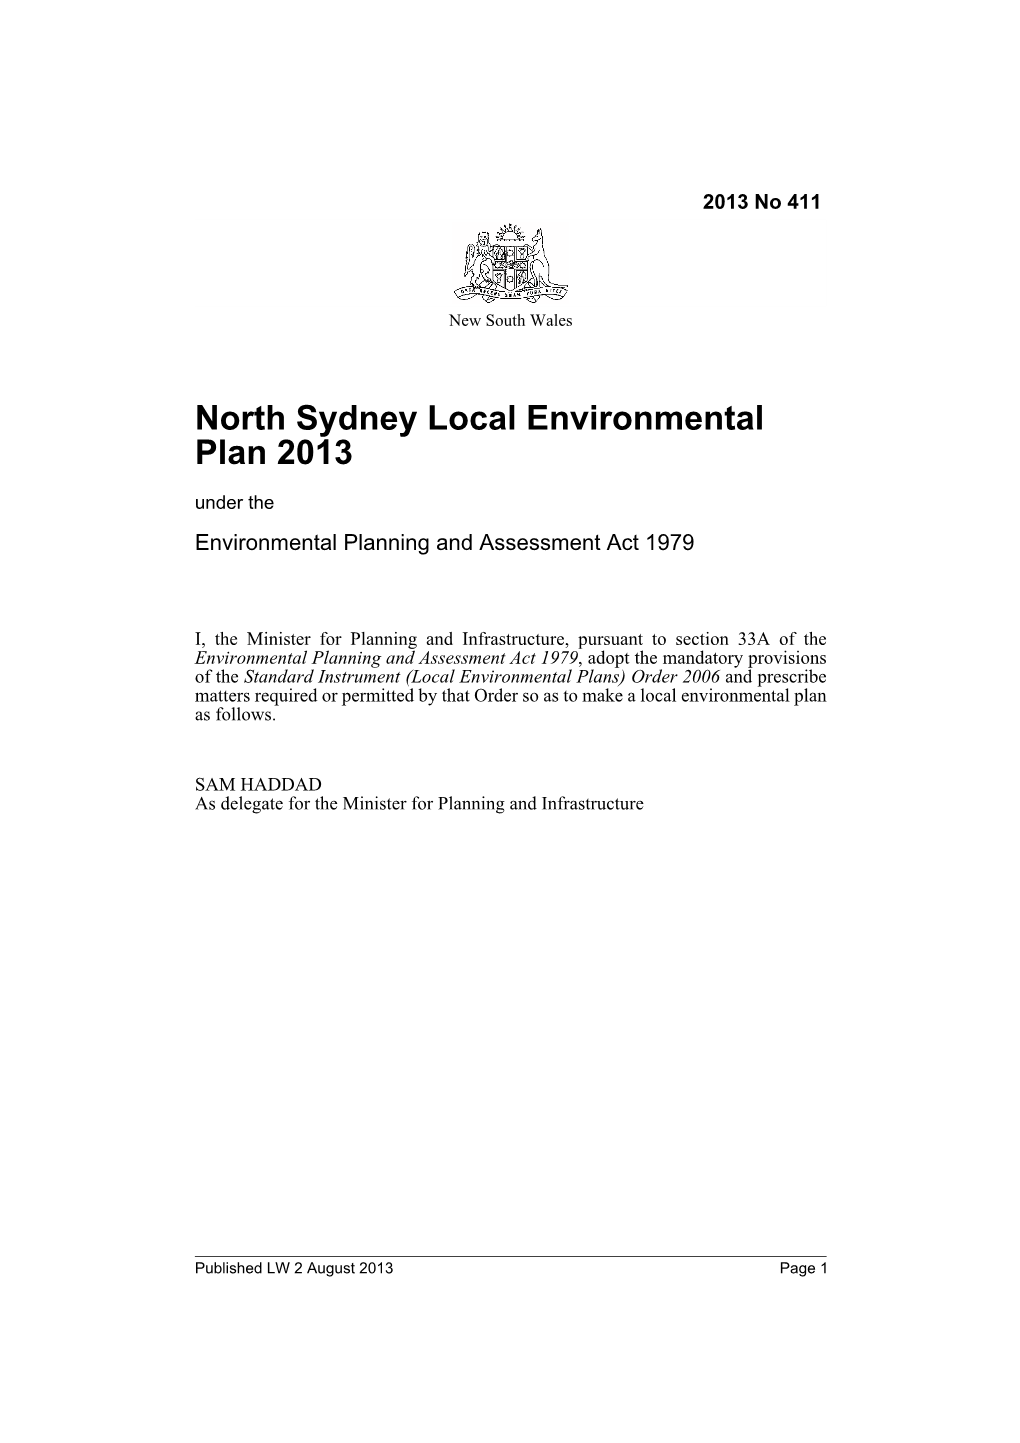 North Sydney Local Environmental Plan 2013 Under the Environmental Planning and Assessment Act 1979